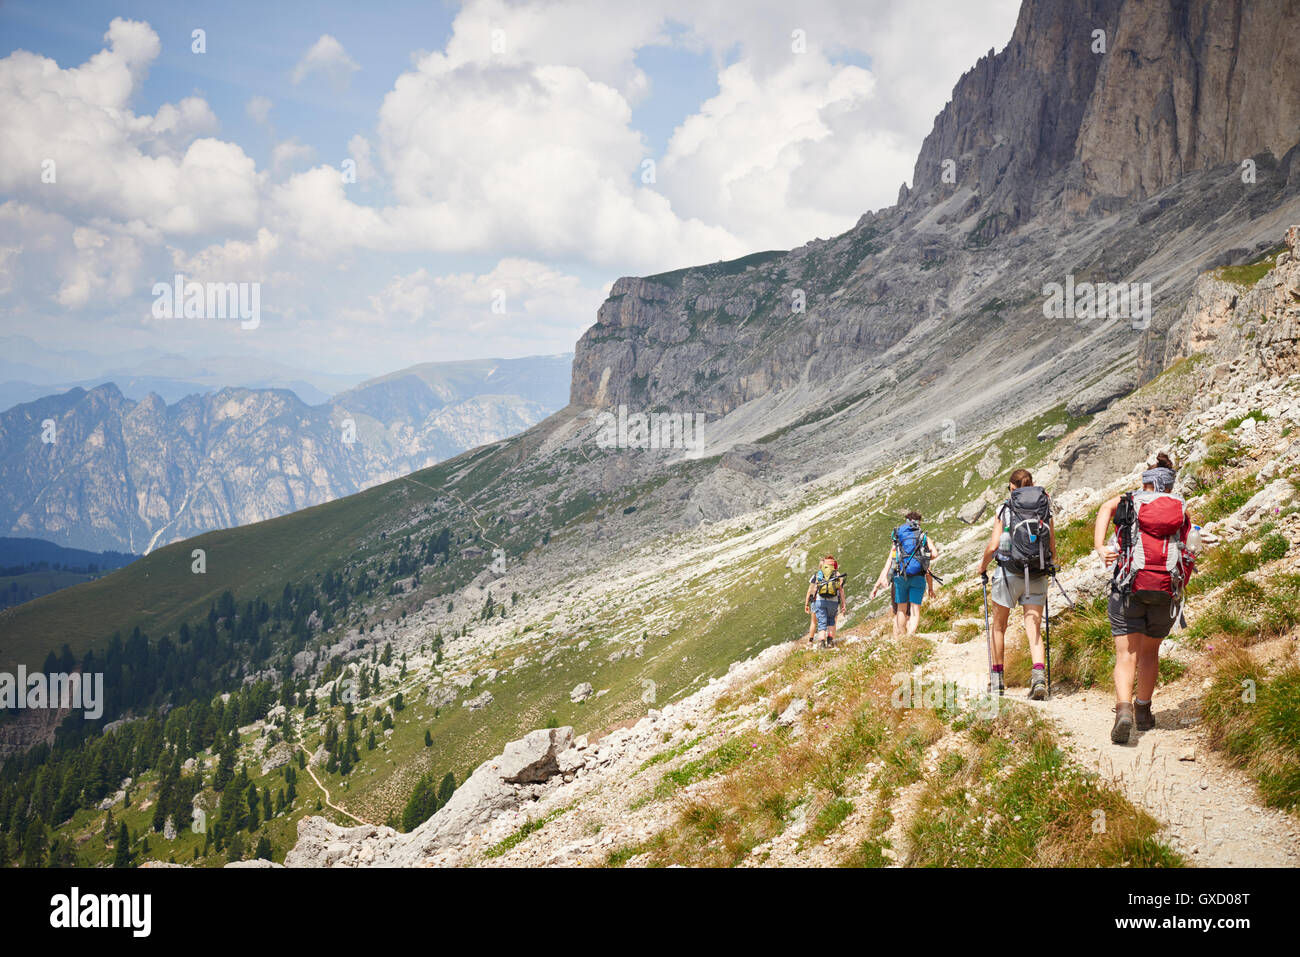 Rear view of hikers on mountain path, Austria Stock Photo